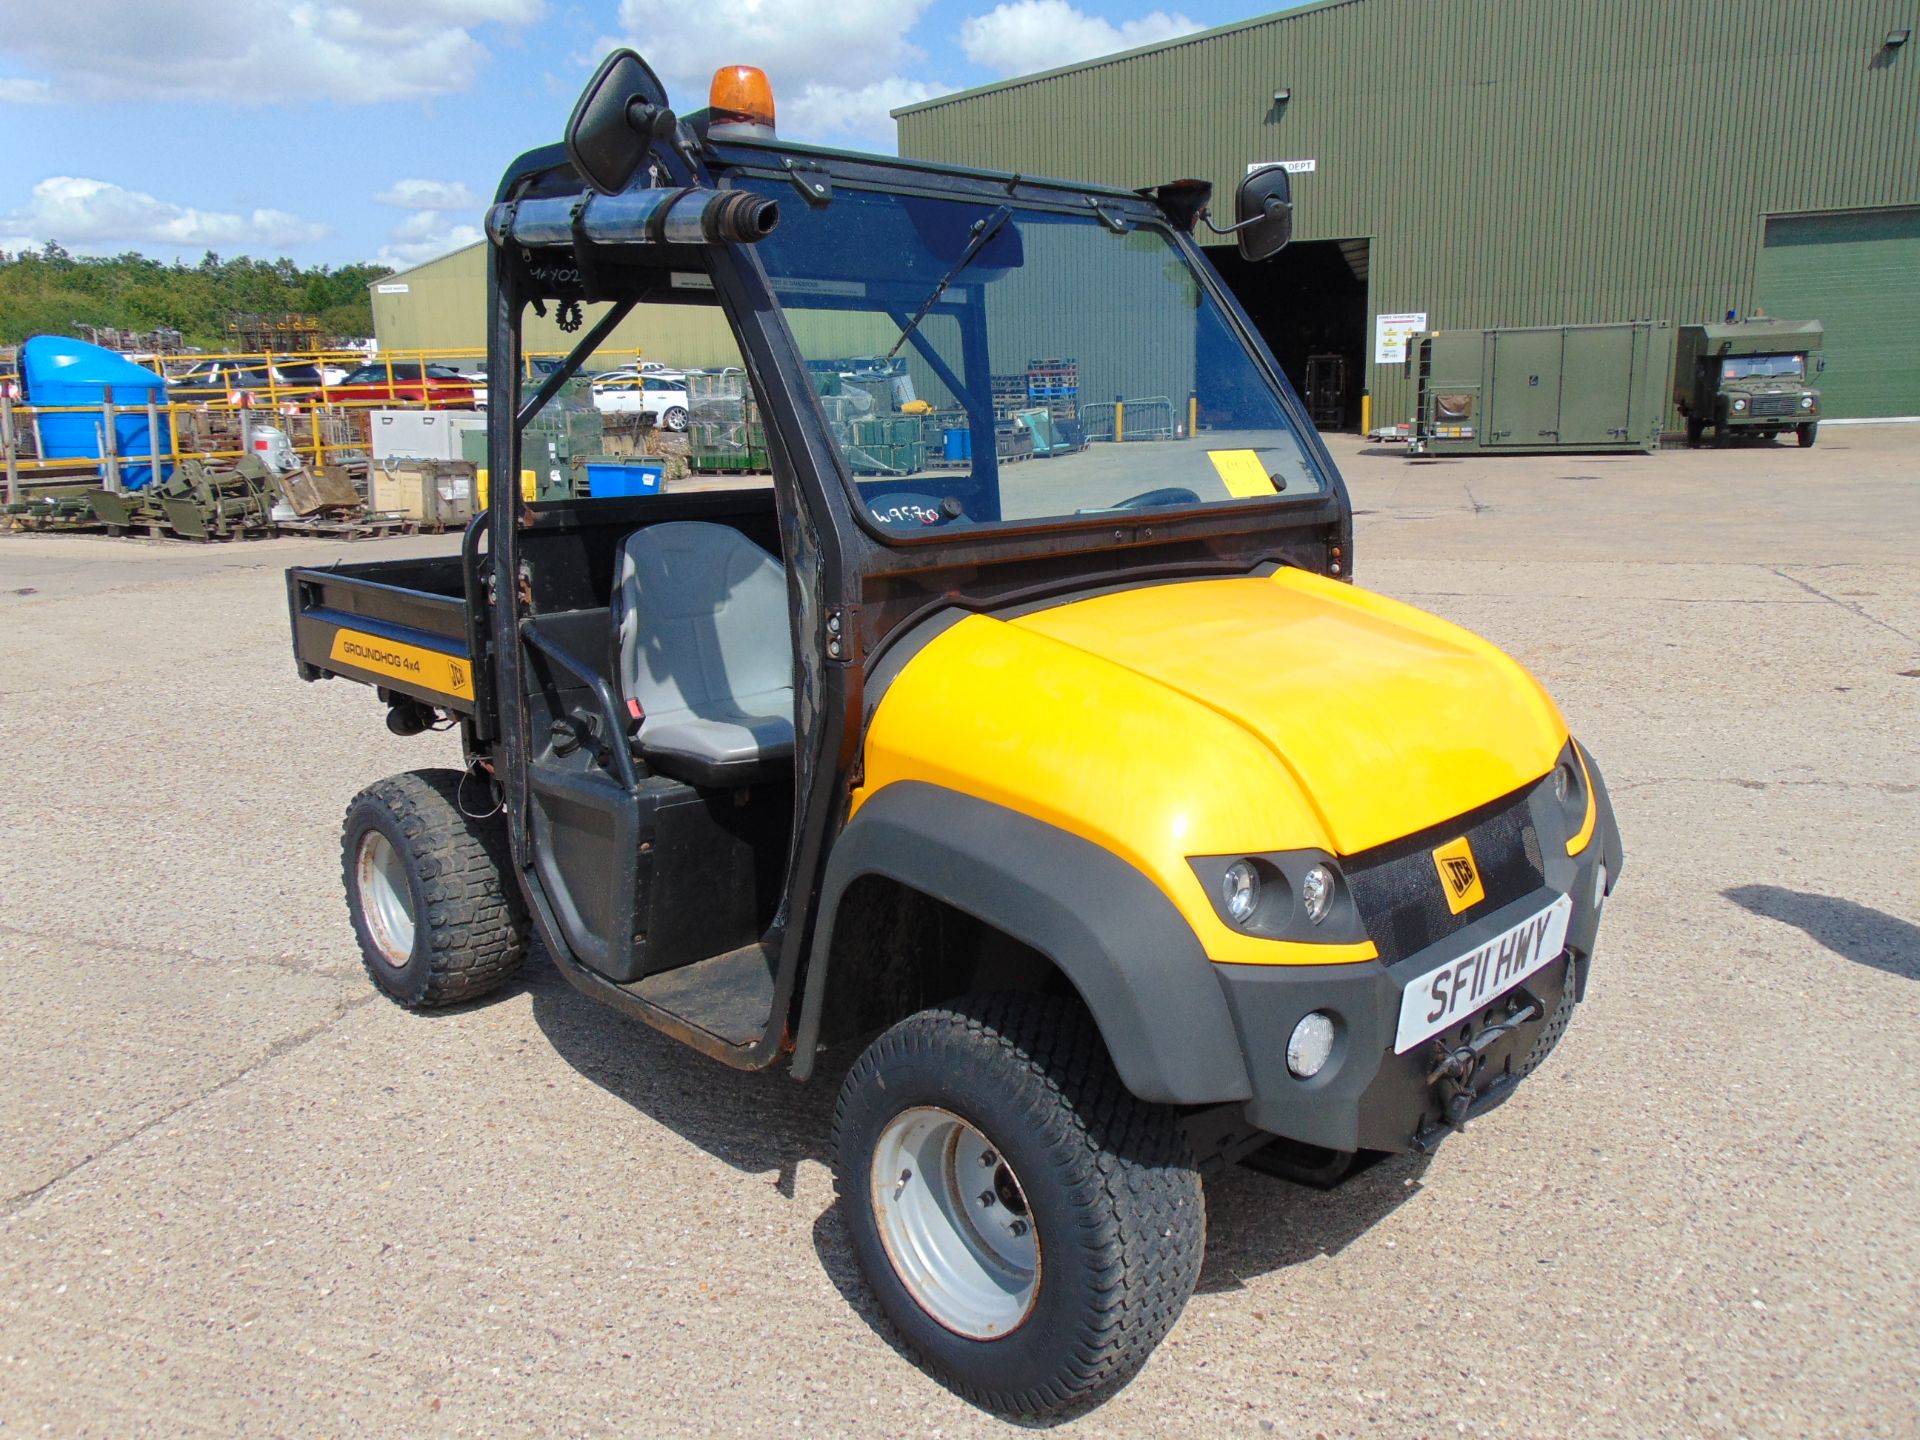 2011 JCB Workmax Groundhog 4WD Diesel Utility Vehicle High Specification ONLY 591 HOURS!